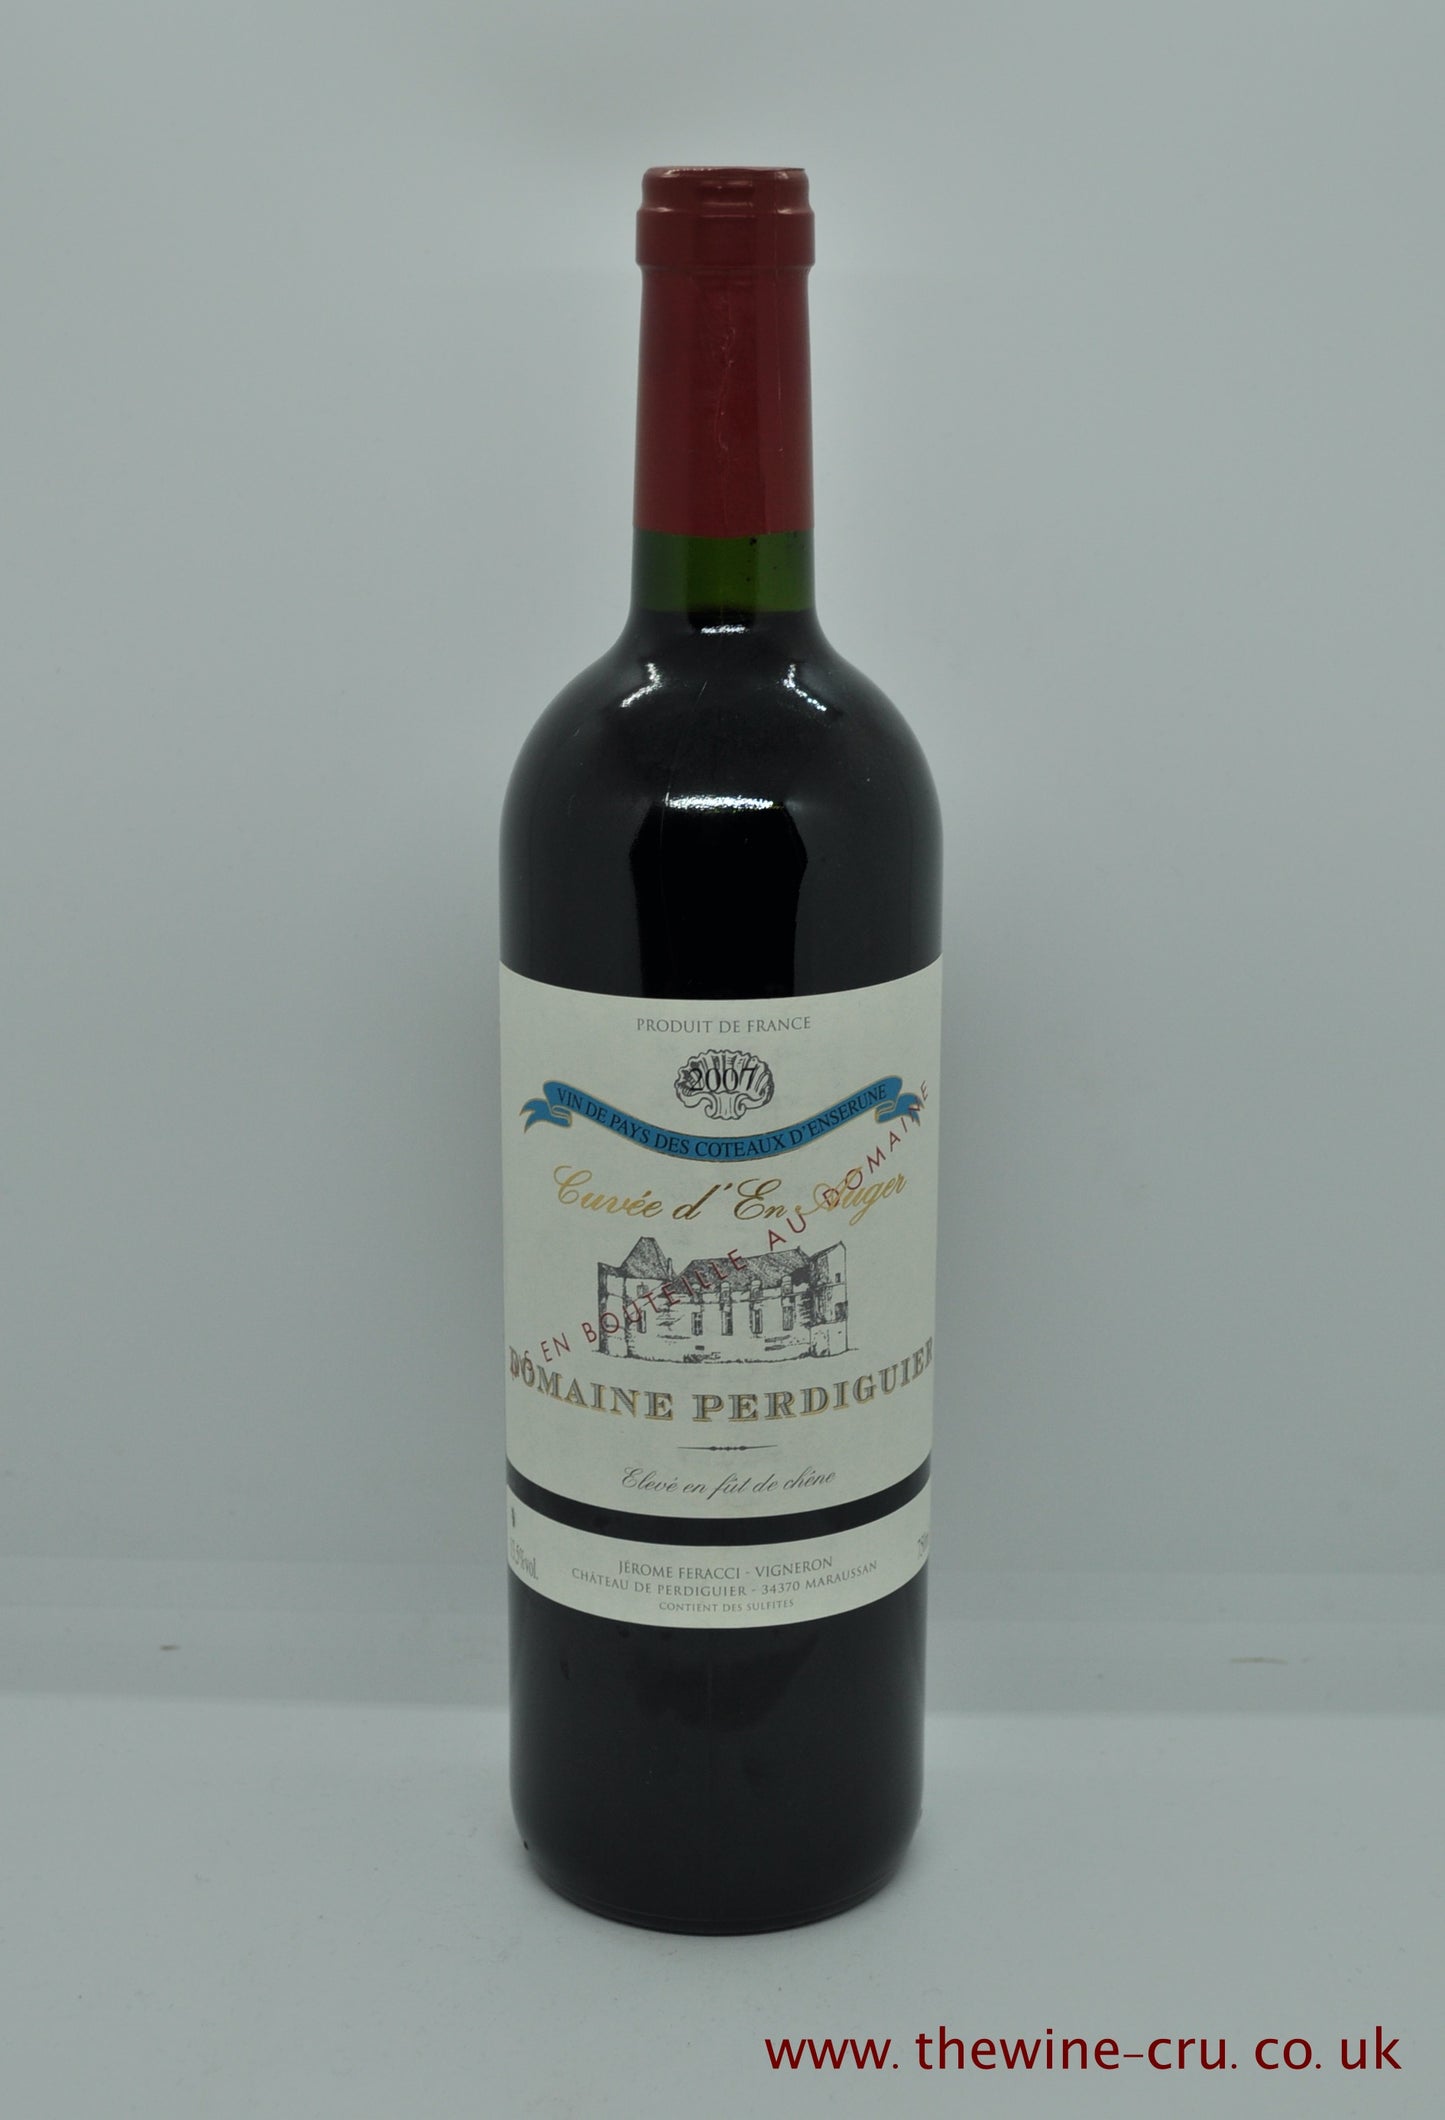 A bottle of 2007 vintage red wine. Domaine Perdiguier Cuvee d'En Auger 2007. France Languedoc-Roussillon. The bottle is in excellent condition. Immediate delivery. Free local delivery. Gift wrapping available.